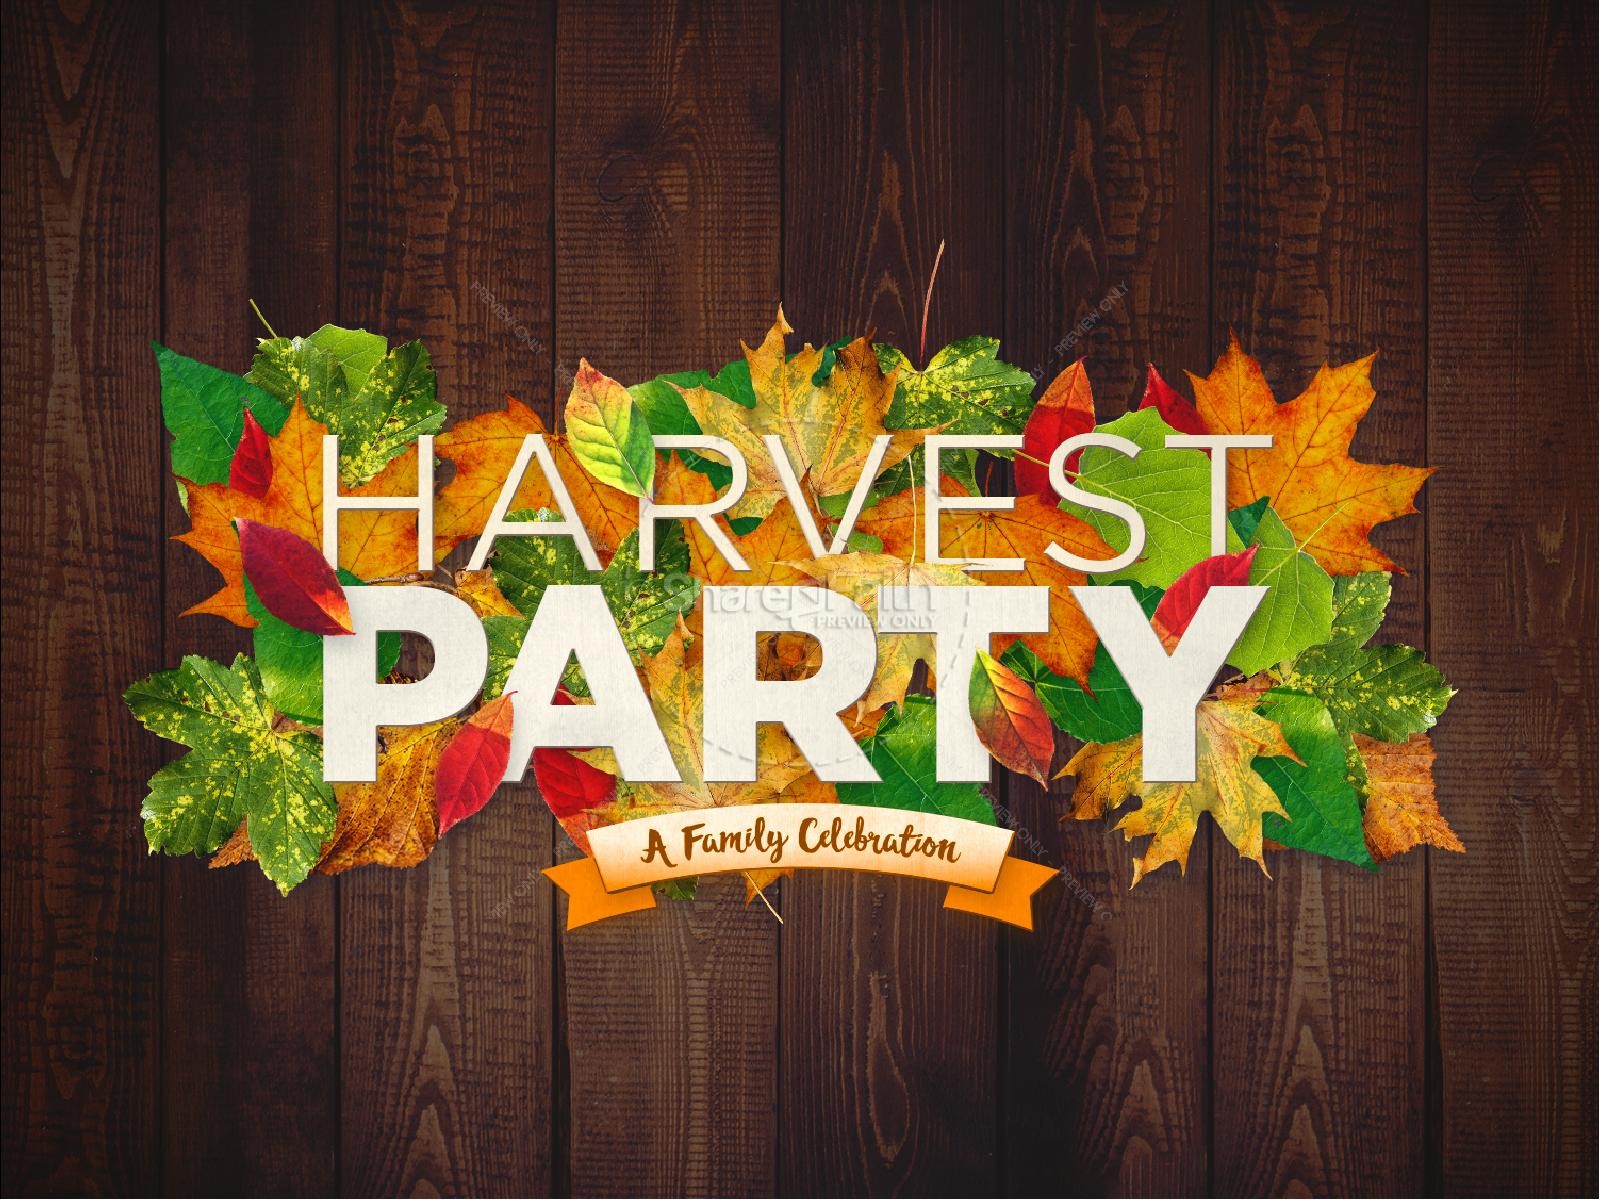 Harvest Party Friday October 27th!!!